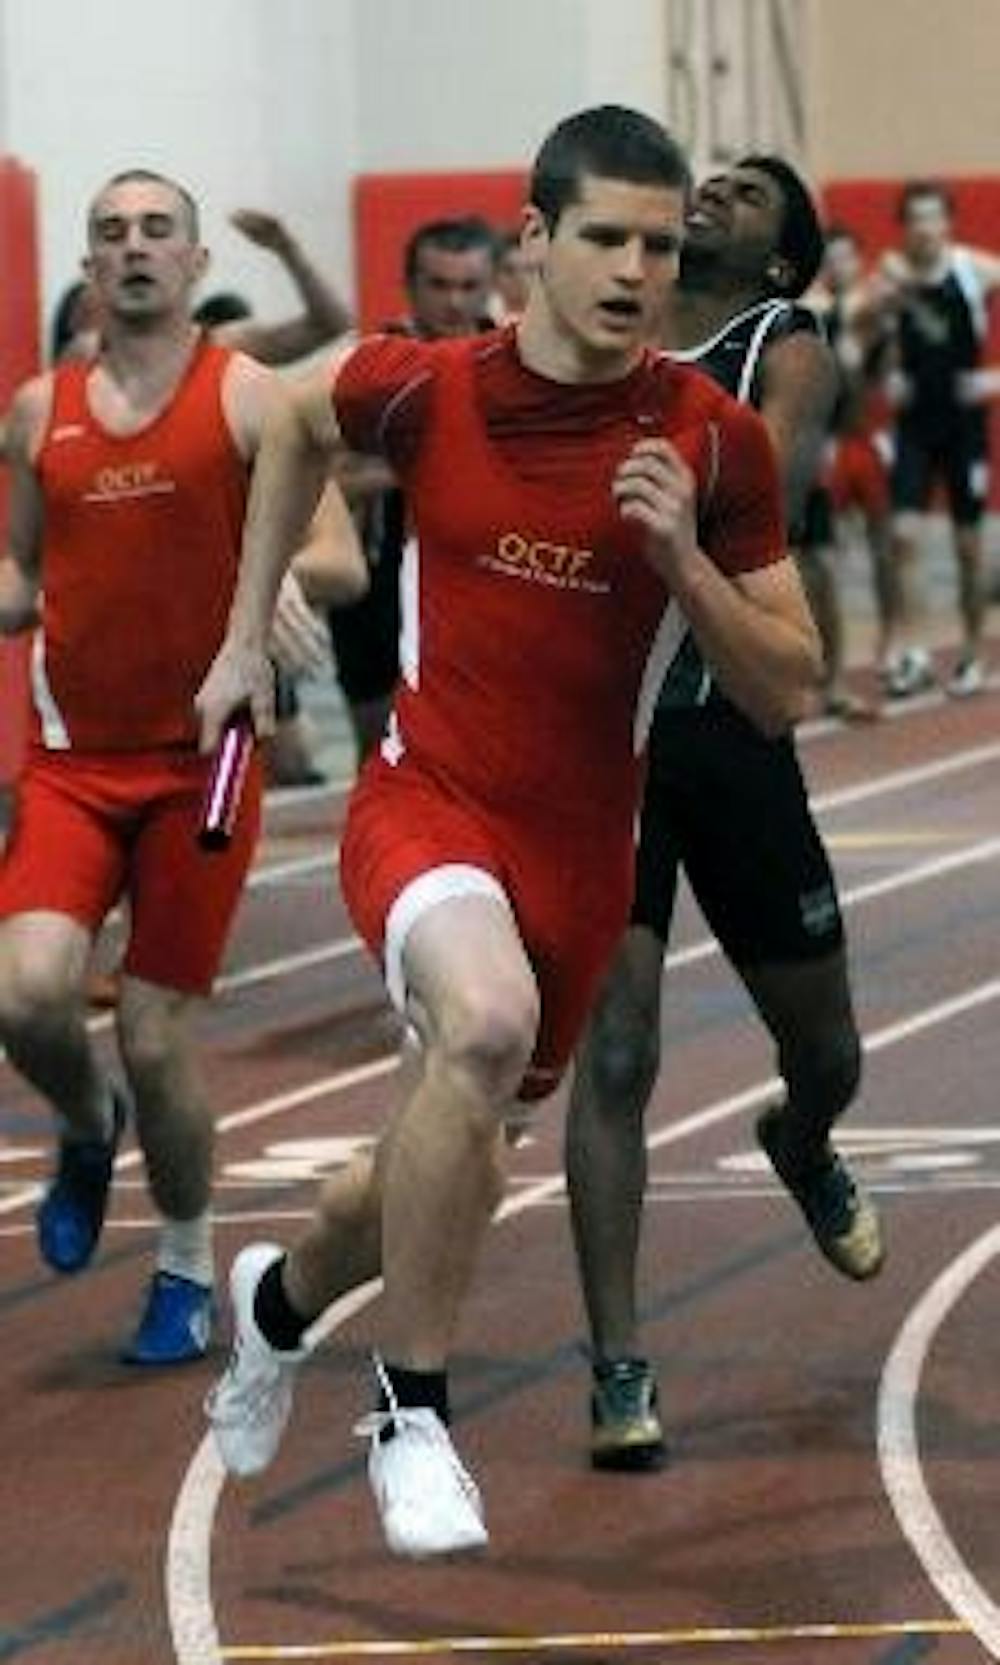 Mike Lash placed fifth in the 55 meter hurdles at OAC.